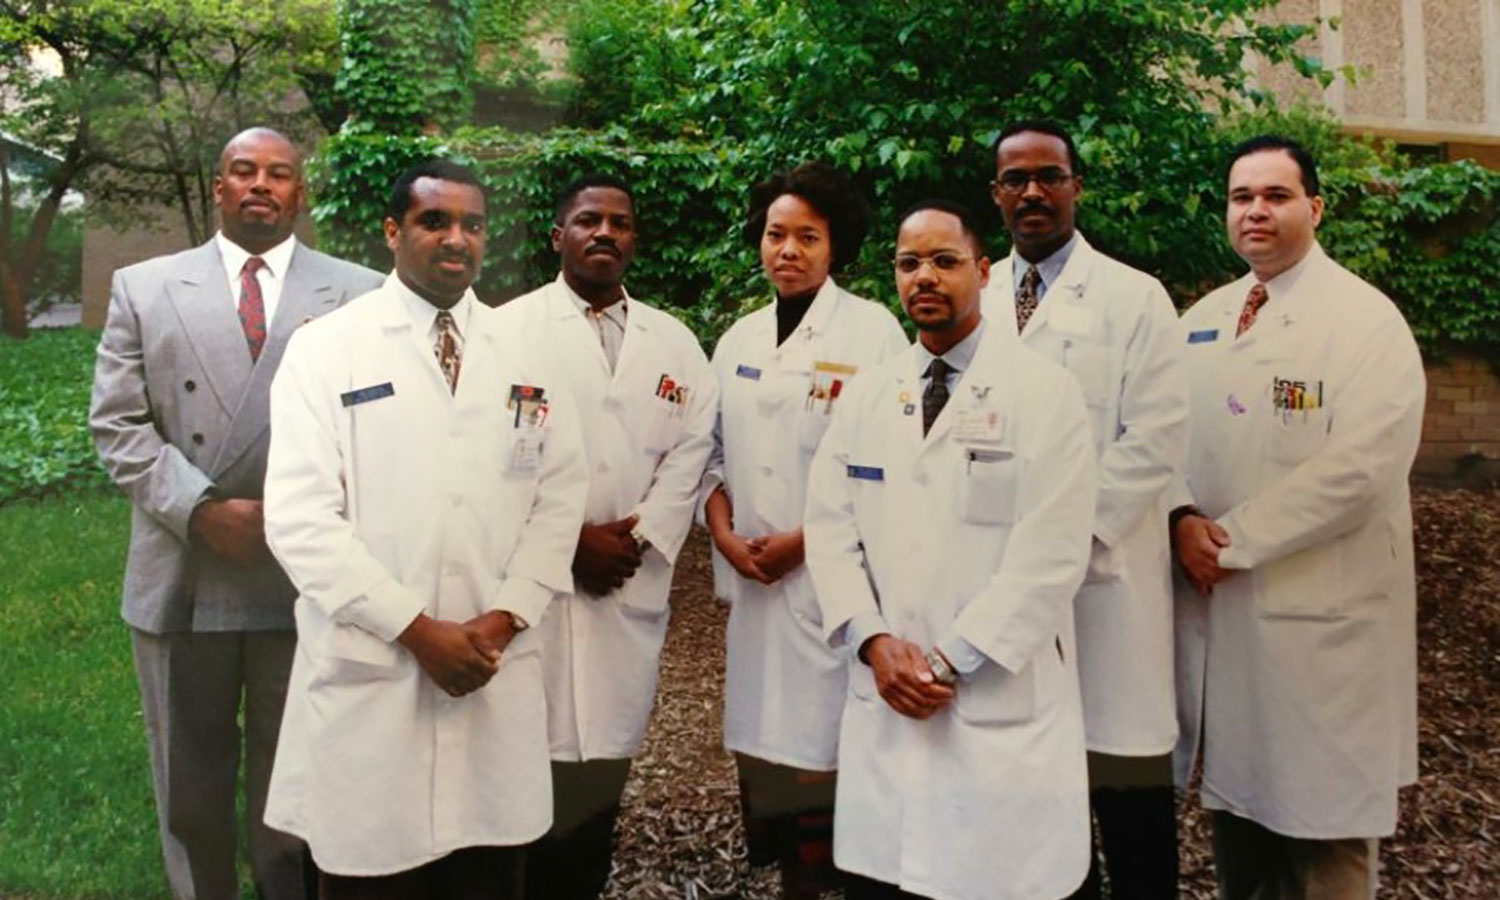 Drs. Charles Greene, Larry Myers, Rodney Taylor, Oneida Arosarena, Monte Harris, Charles Boyd, and David Brown (left to right)